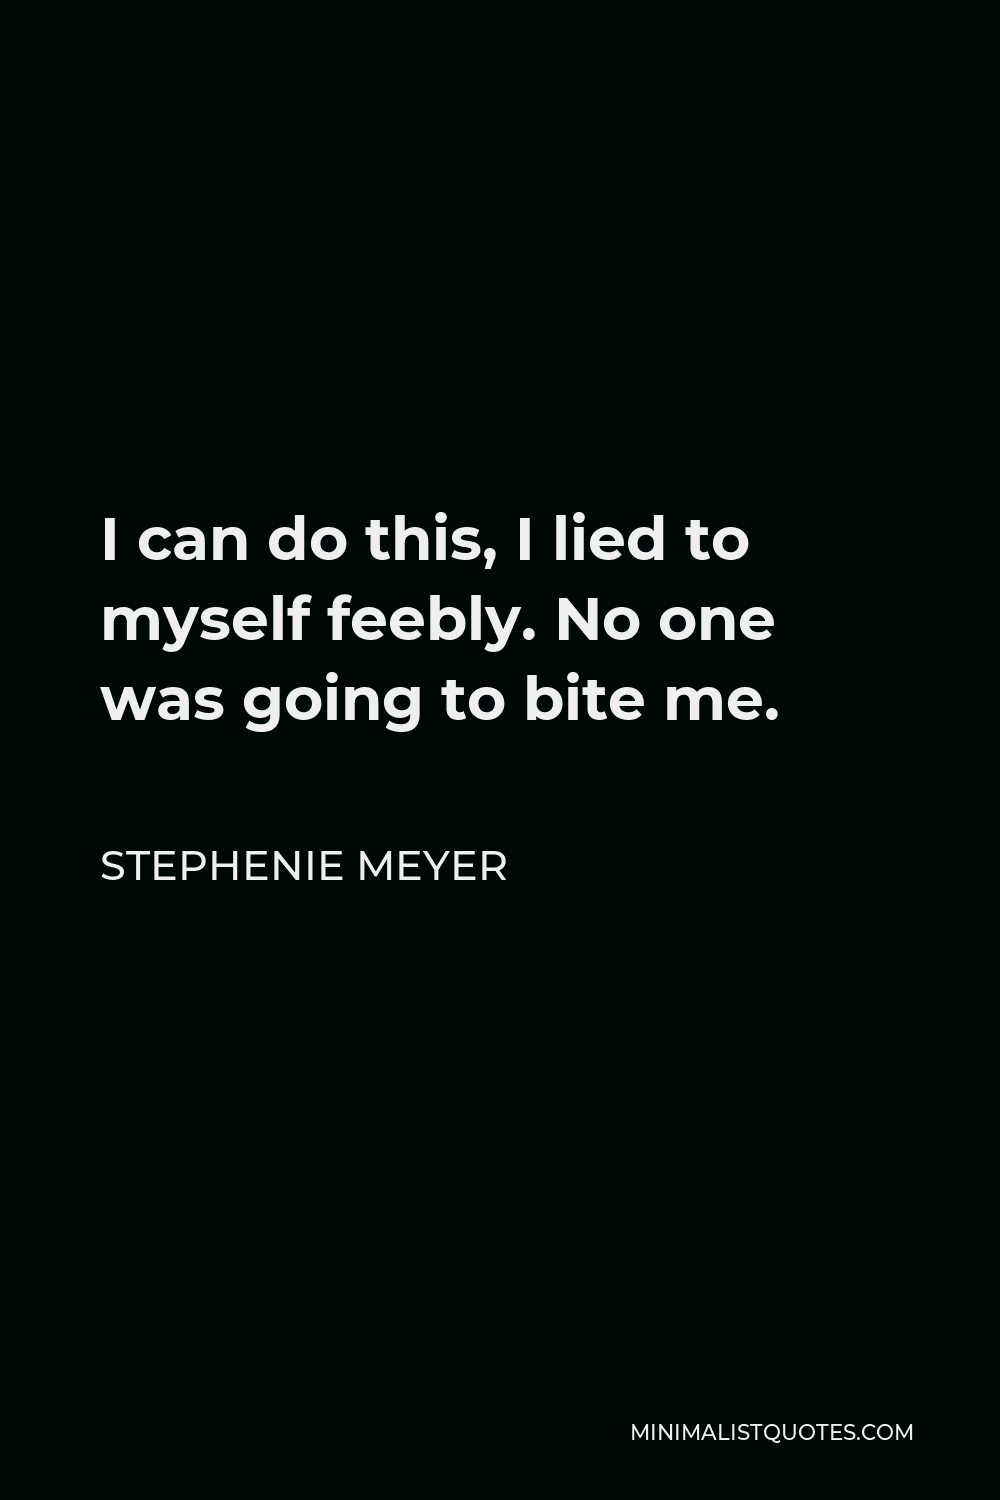 Stephenie Meyer Quote - I can do this, I lied to myself feebly. No one was going to bite me.